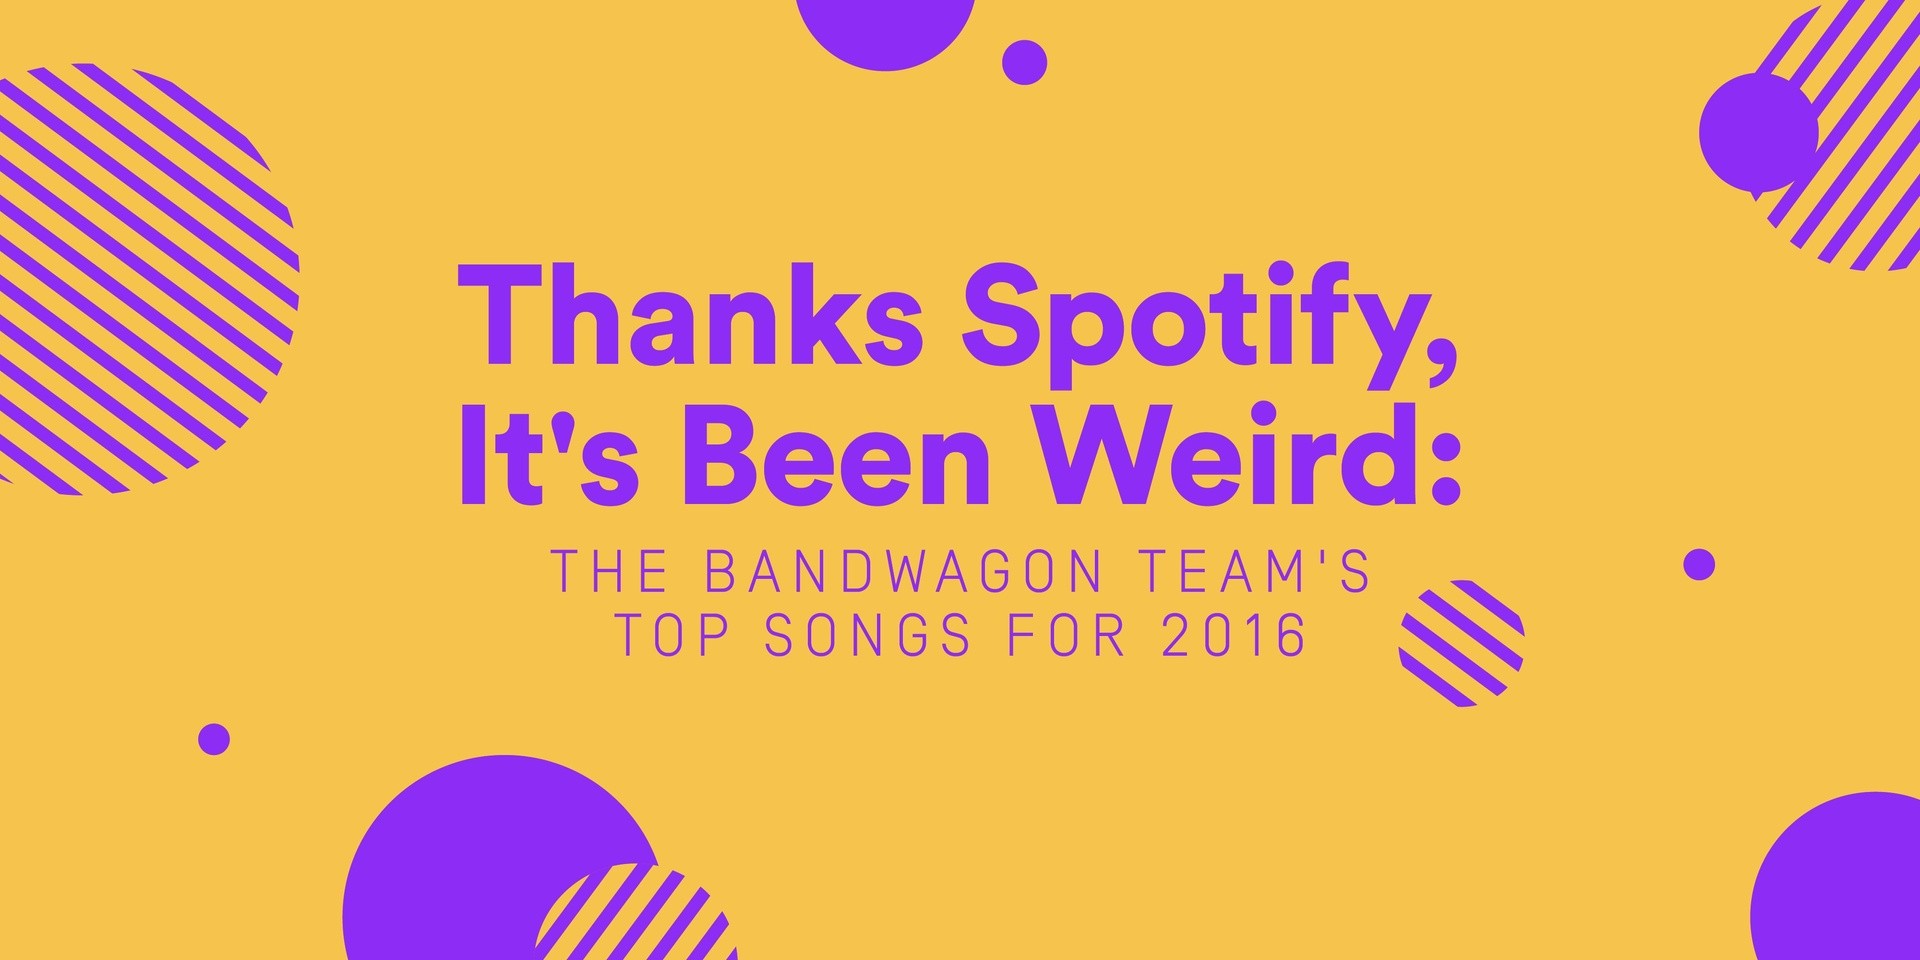 Thanks, Spotify, It's Been Weird: The Bandwagon Team's Top Songs for 2016